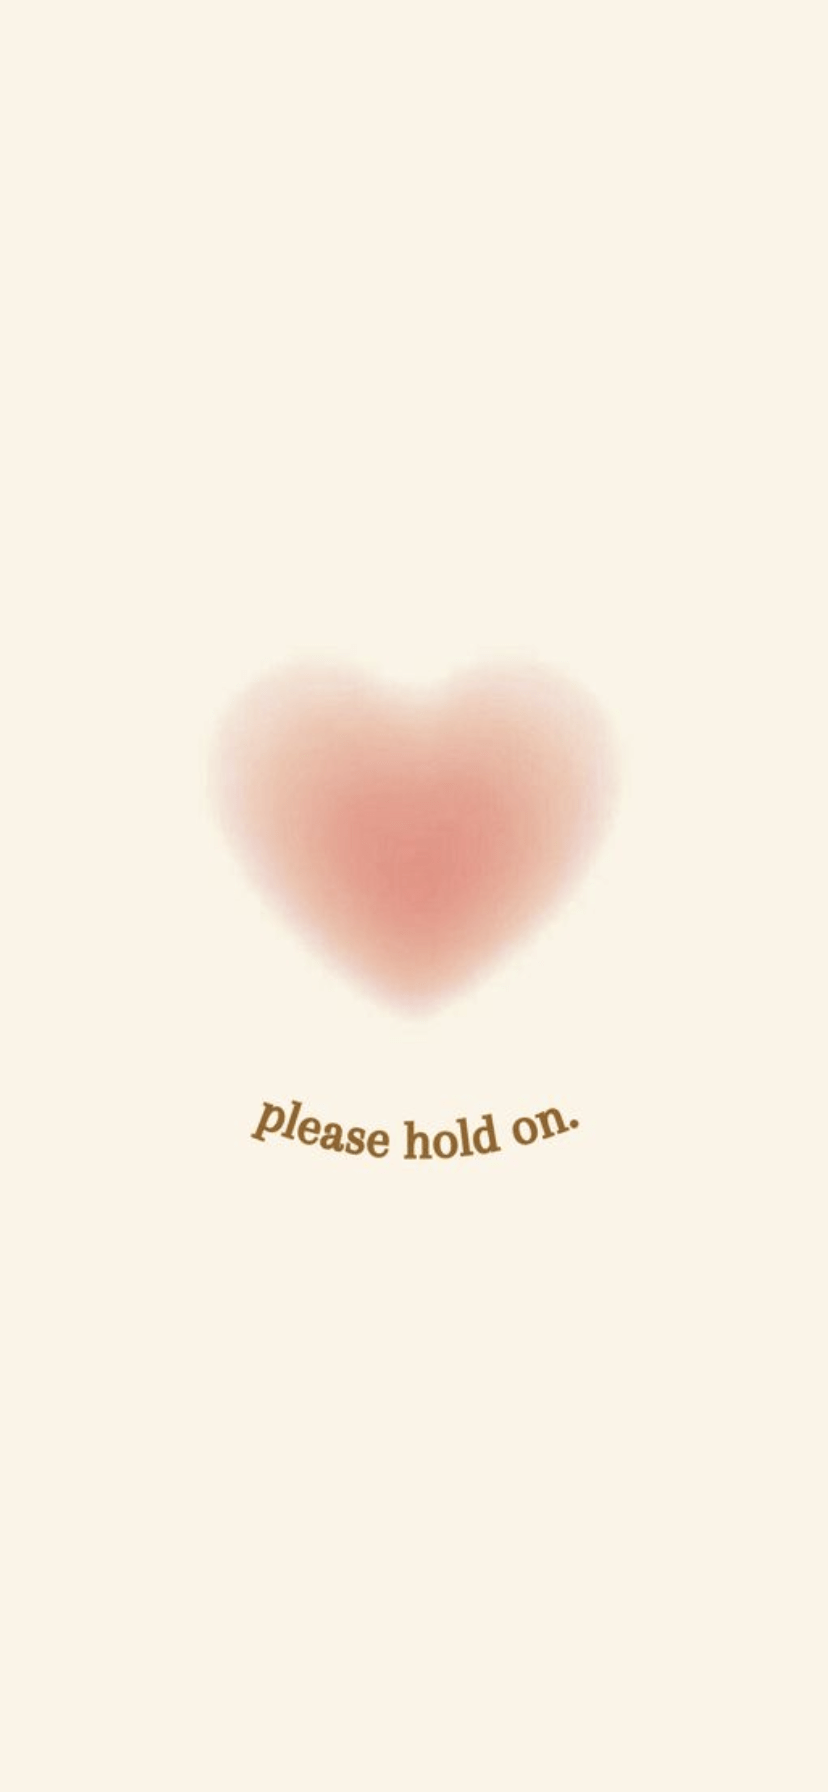 The heart is a pink, with text that says please hold on - Motivational